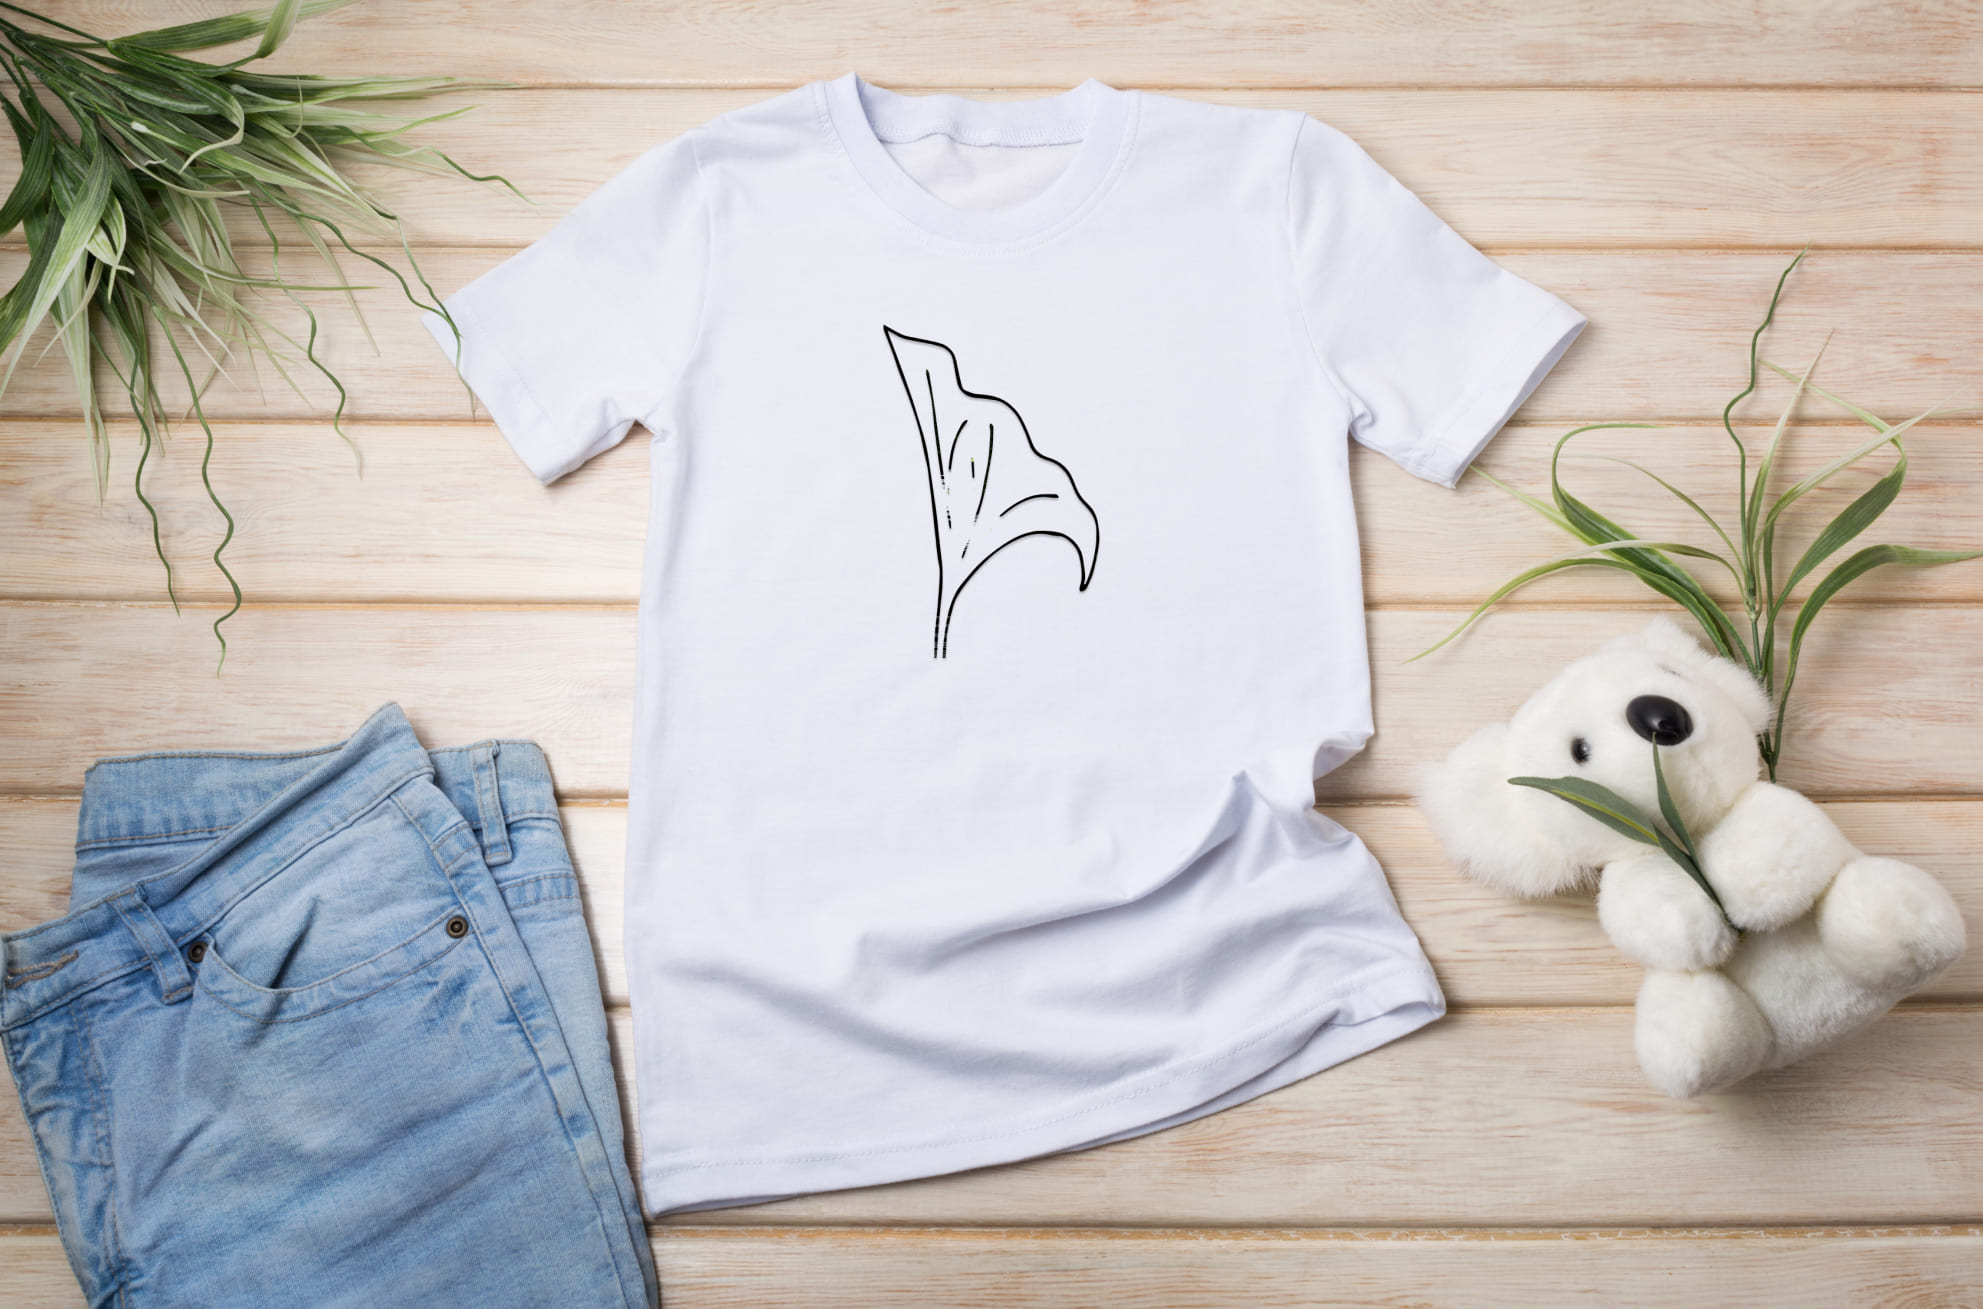 Lotus flower on the classic white t-shirt.